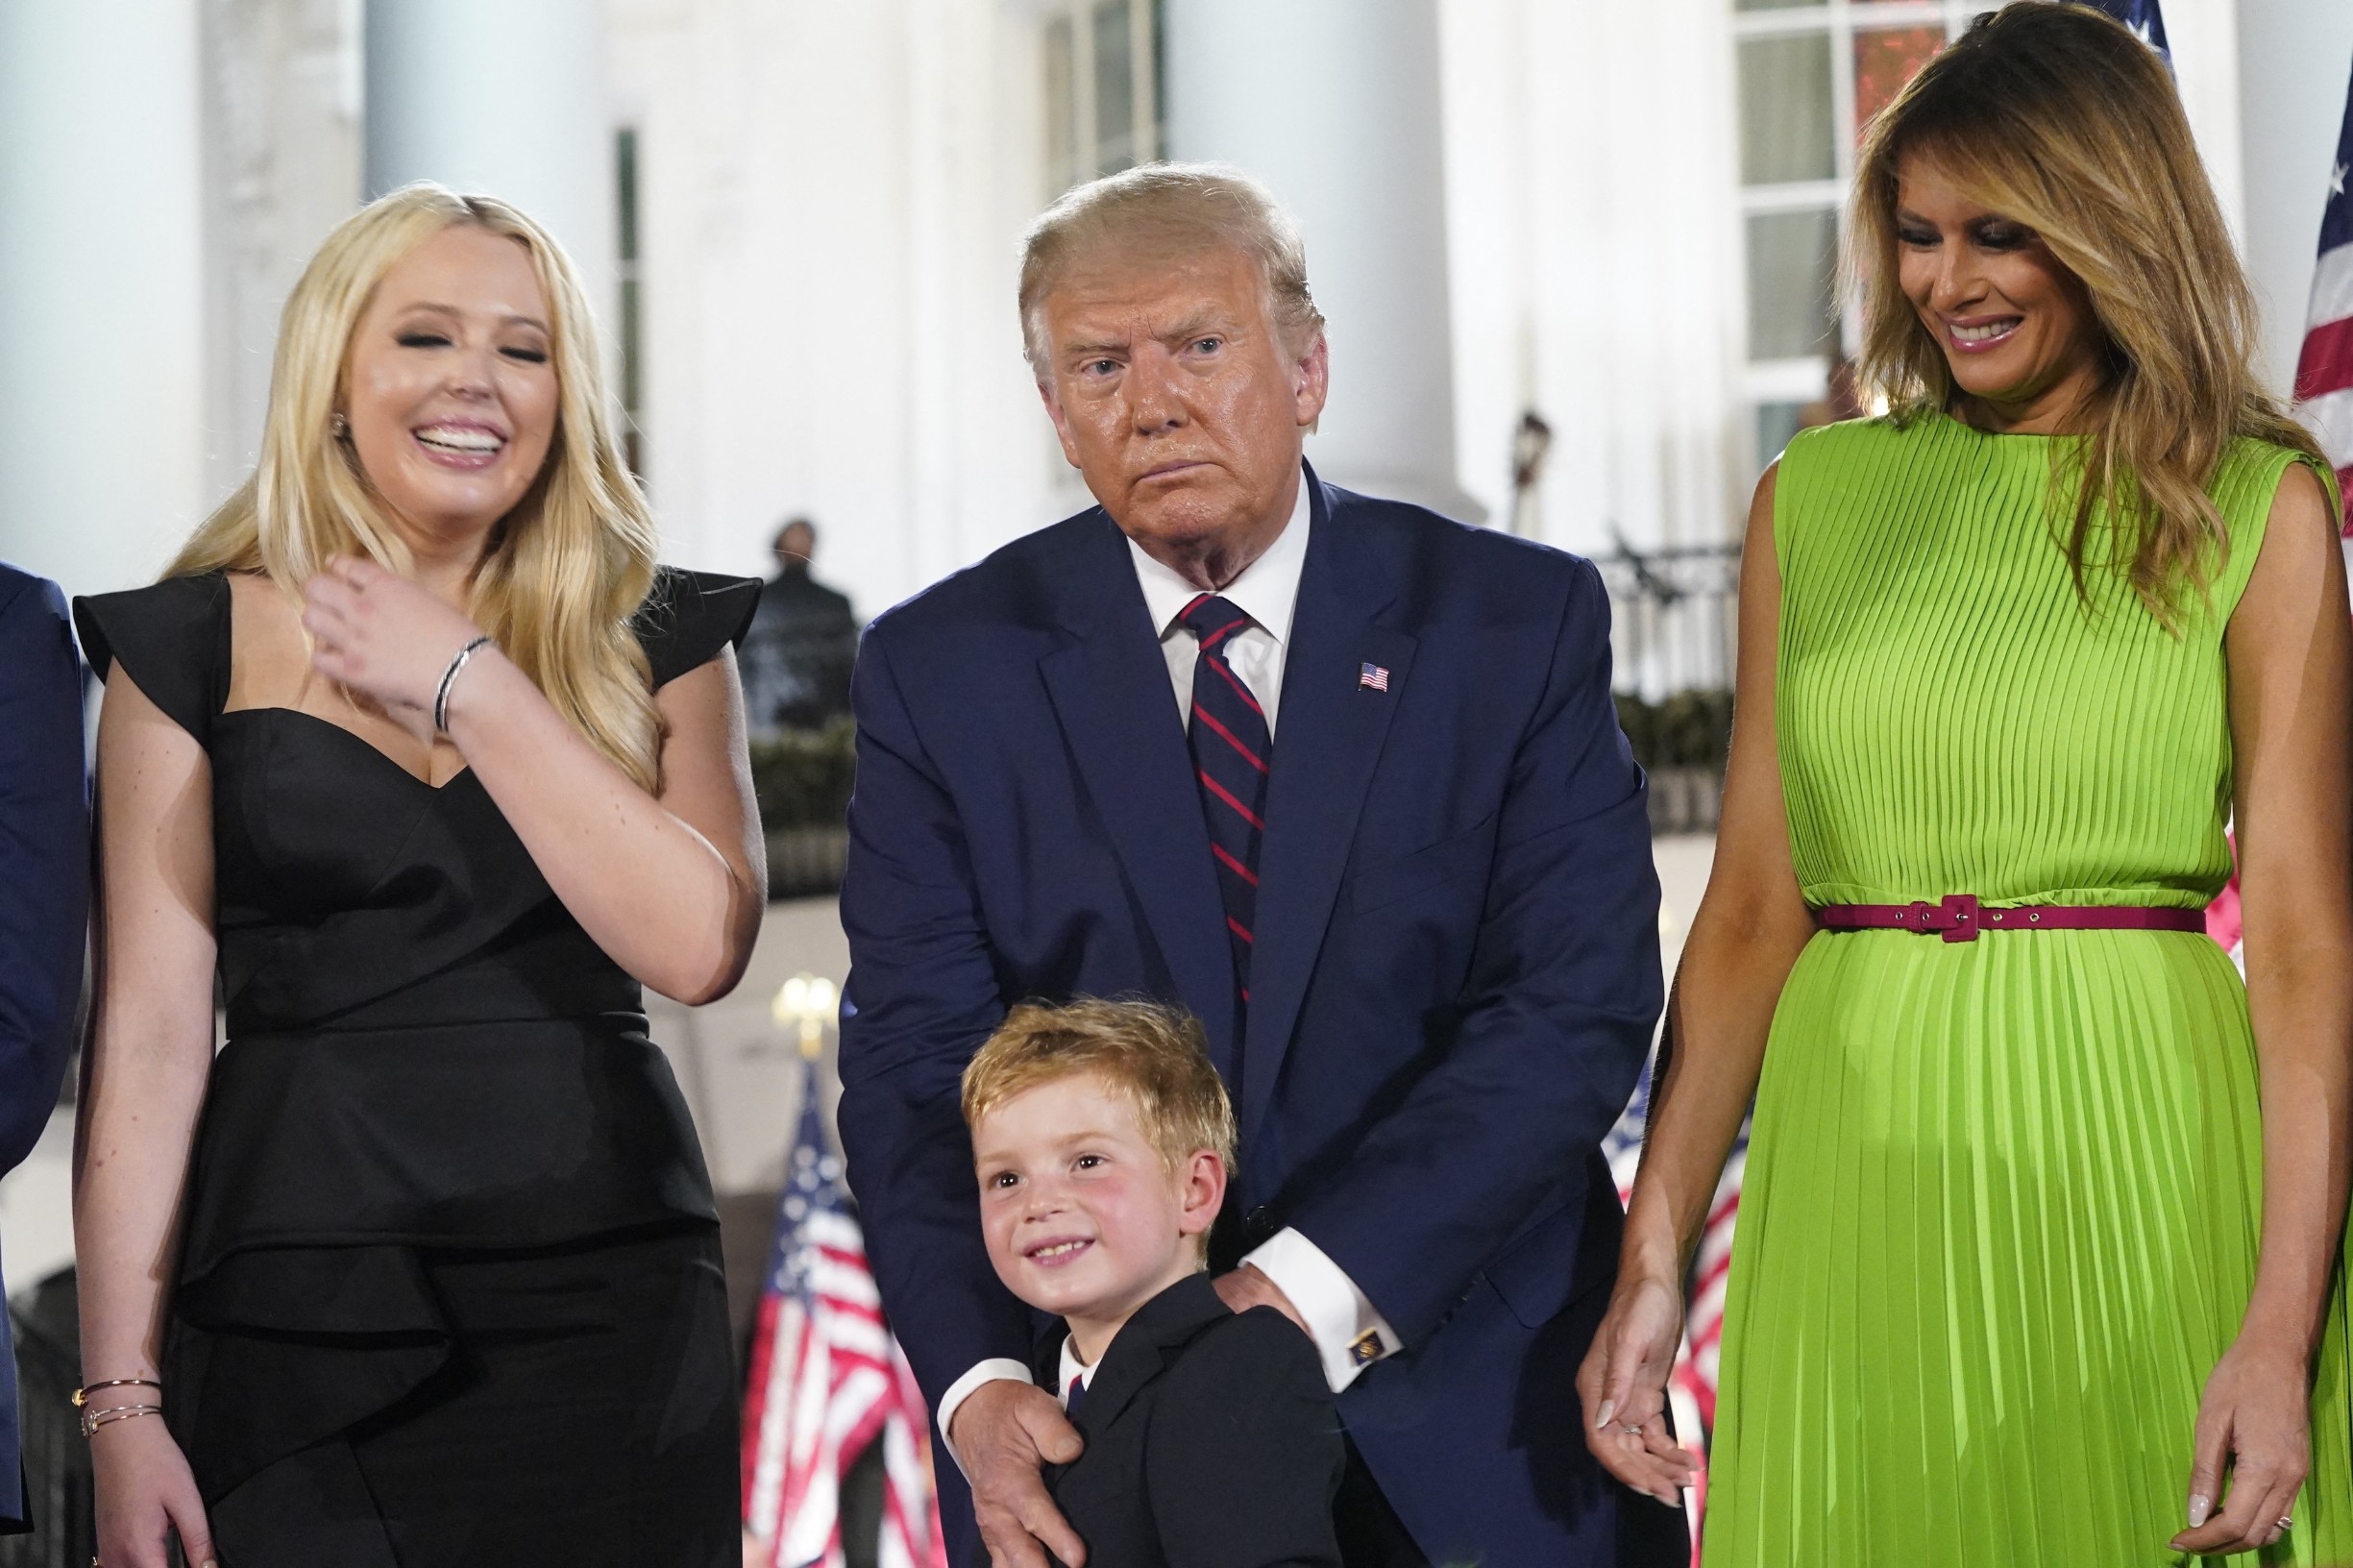 August 27, 2020 - Washington, DC, United States: Tiffany Trump, Donald Trump, Melania Trump. U.S. President Donald Trump formally accepts the 2020 Republican presidential nomination during his Republican National Convention address from the South Lawn at the White House. (Erin Scott/Polaris) ///,Image: 555283166, License: Rights-managed, Restrictions: , Model Release: no, Credit line: Pool/ABACA / Abaca Press / Profimedia